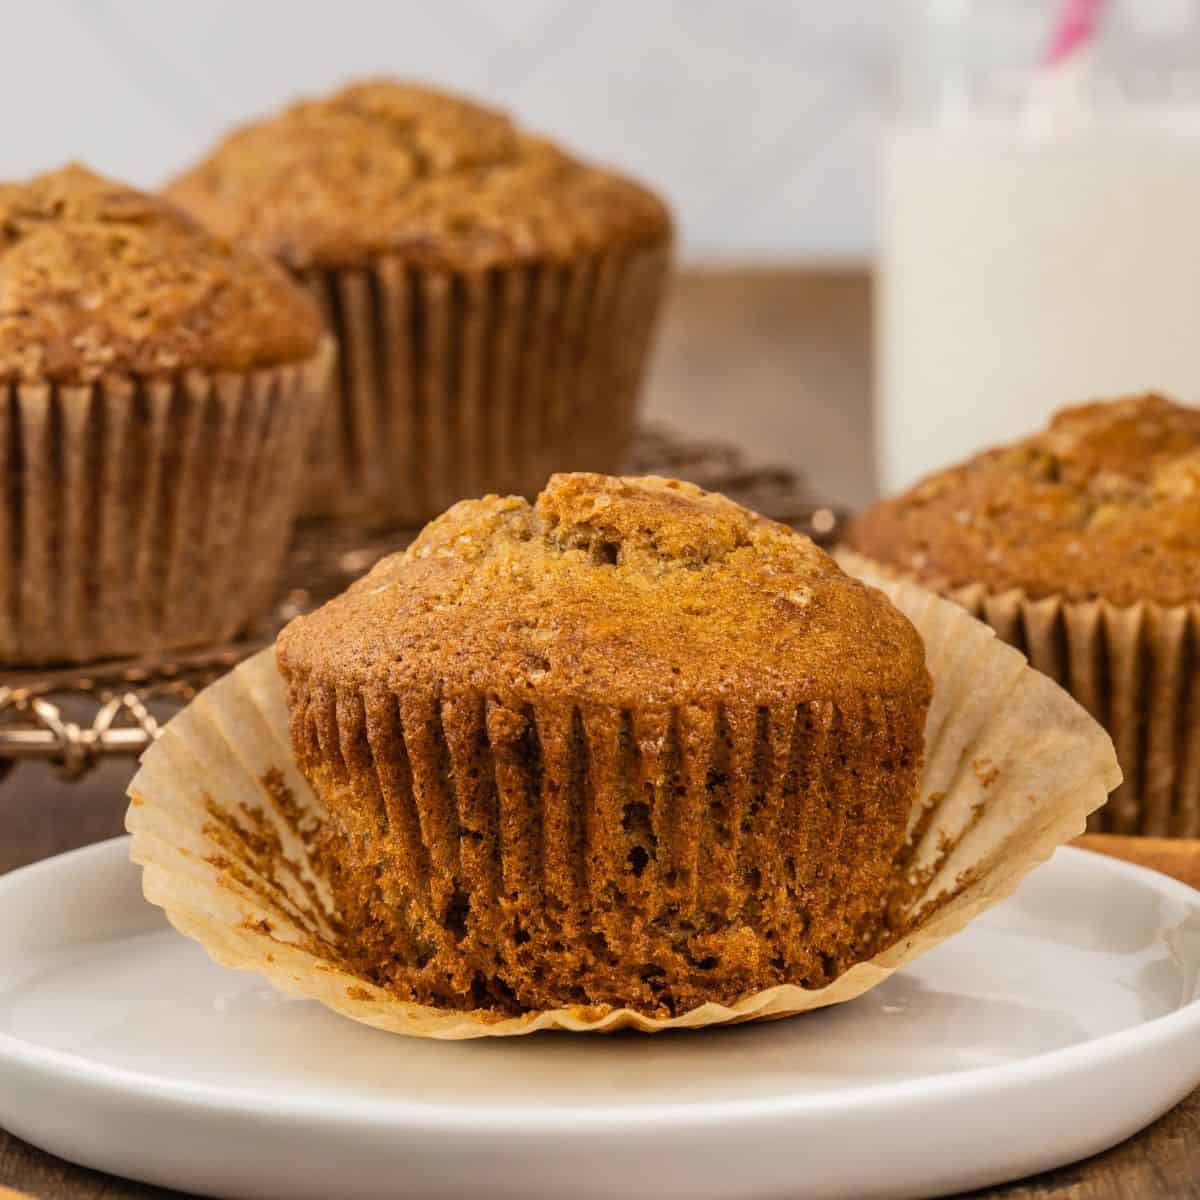 an unwrapped gluten free banana muffin sits on a white round plate with more muffins blurred in the background